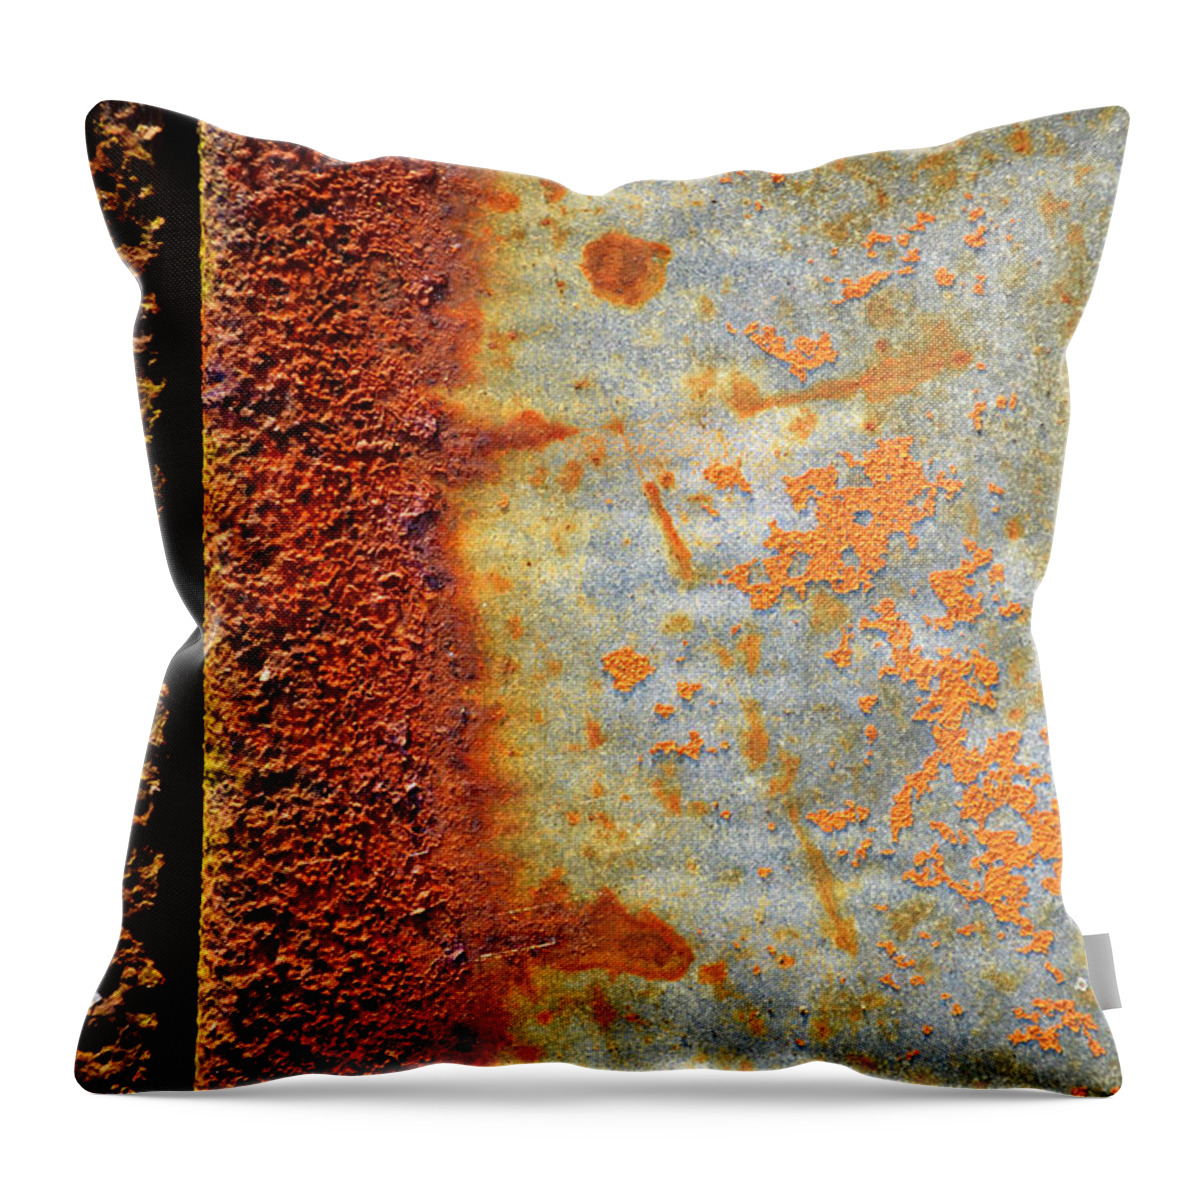 Oxidation Throw Pillow featuring the photograph Oxidation by Tom Druin